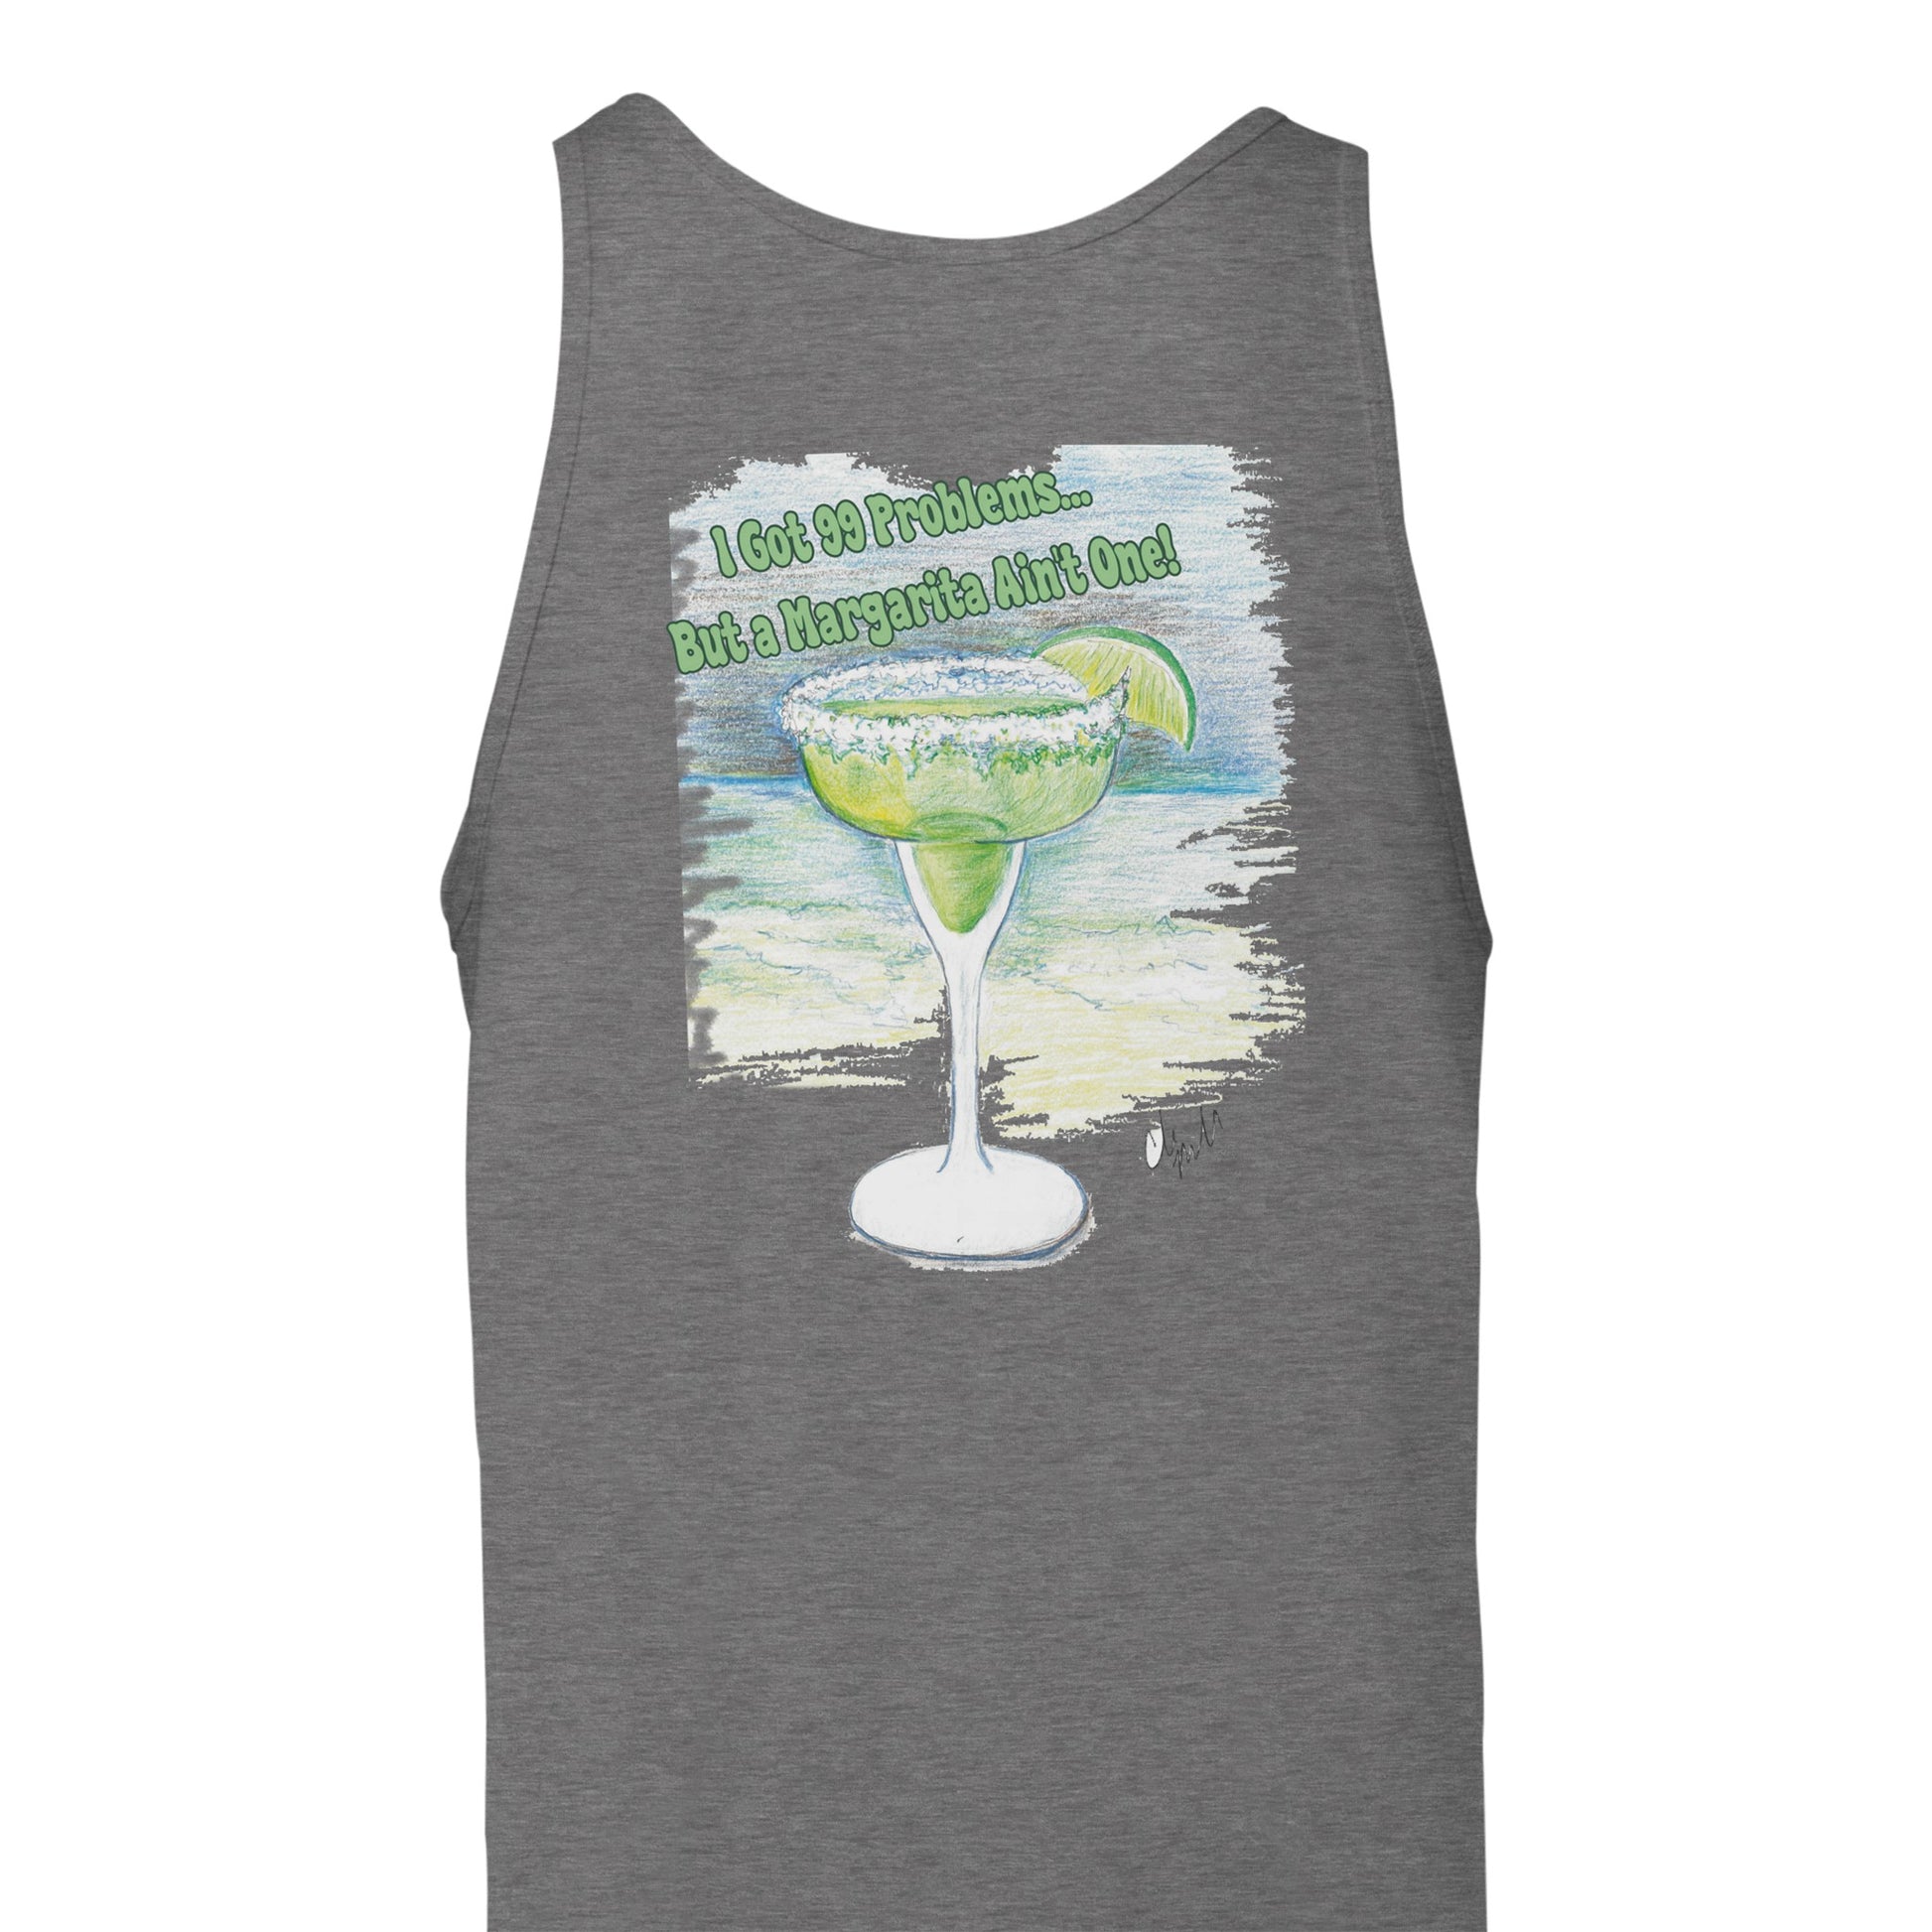 A dark heather Premium Unisex Tank Top with original artwork and motto I Got 99 Problems But a Margarita Ain't One on back and WhatYa Say logo on front from combed and ring-spun cotton back view.